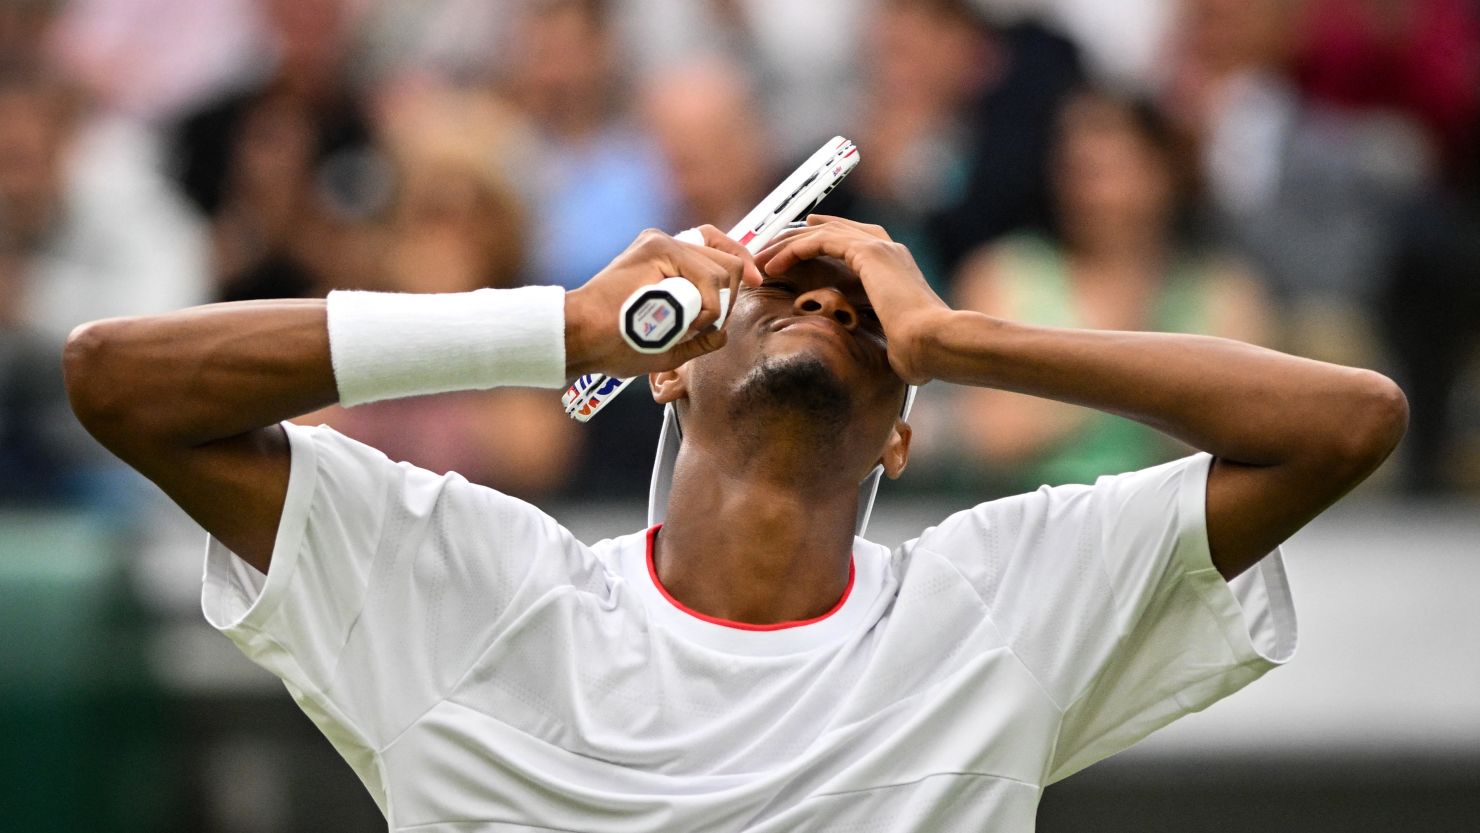 US player Christopher Eubanks reacts as he plays against Russia's Daniil Medvedev during their men's singles quarter-finals match at Wimbledon.